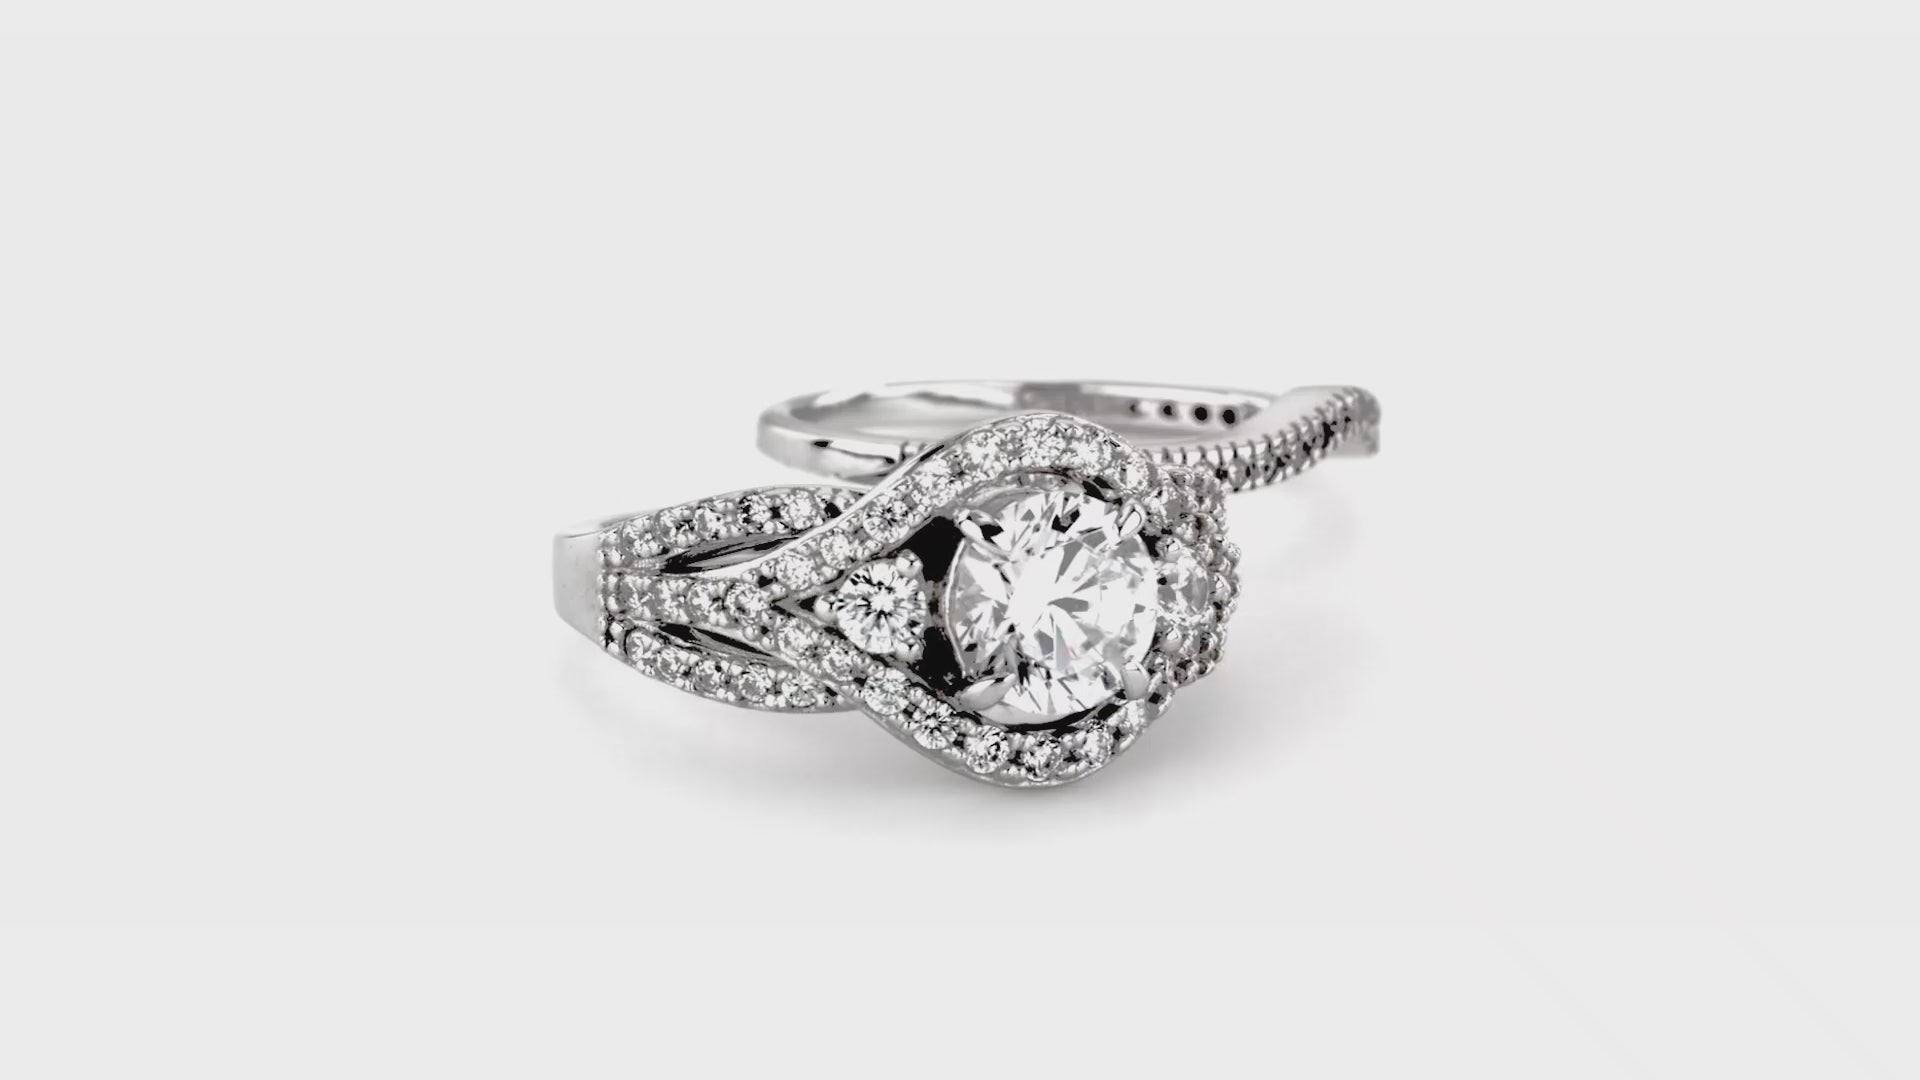 Video Contains 3-Stone Round CZ Ring Set in Sterling Silver. Style Number VR259-01